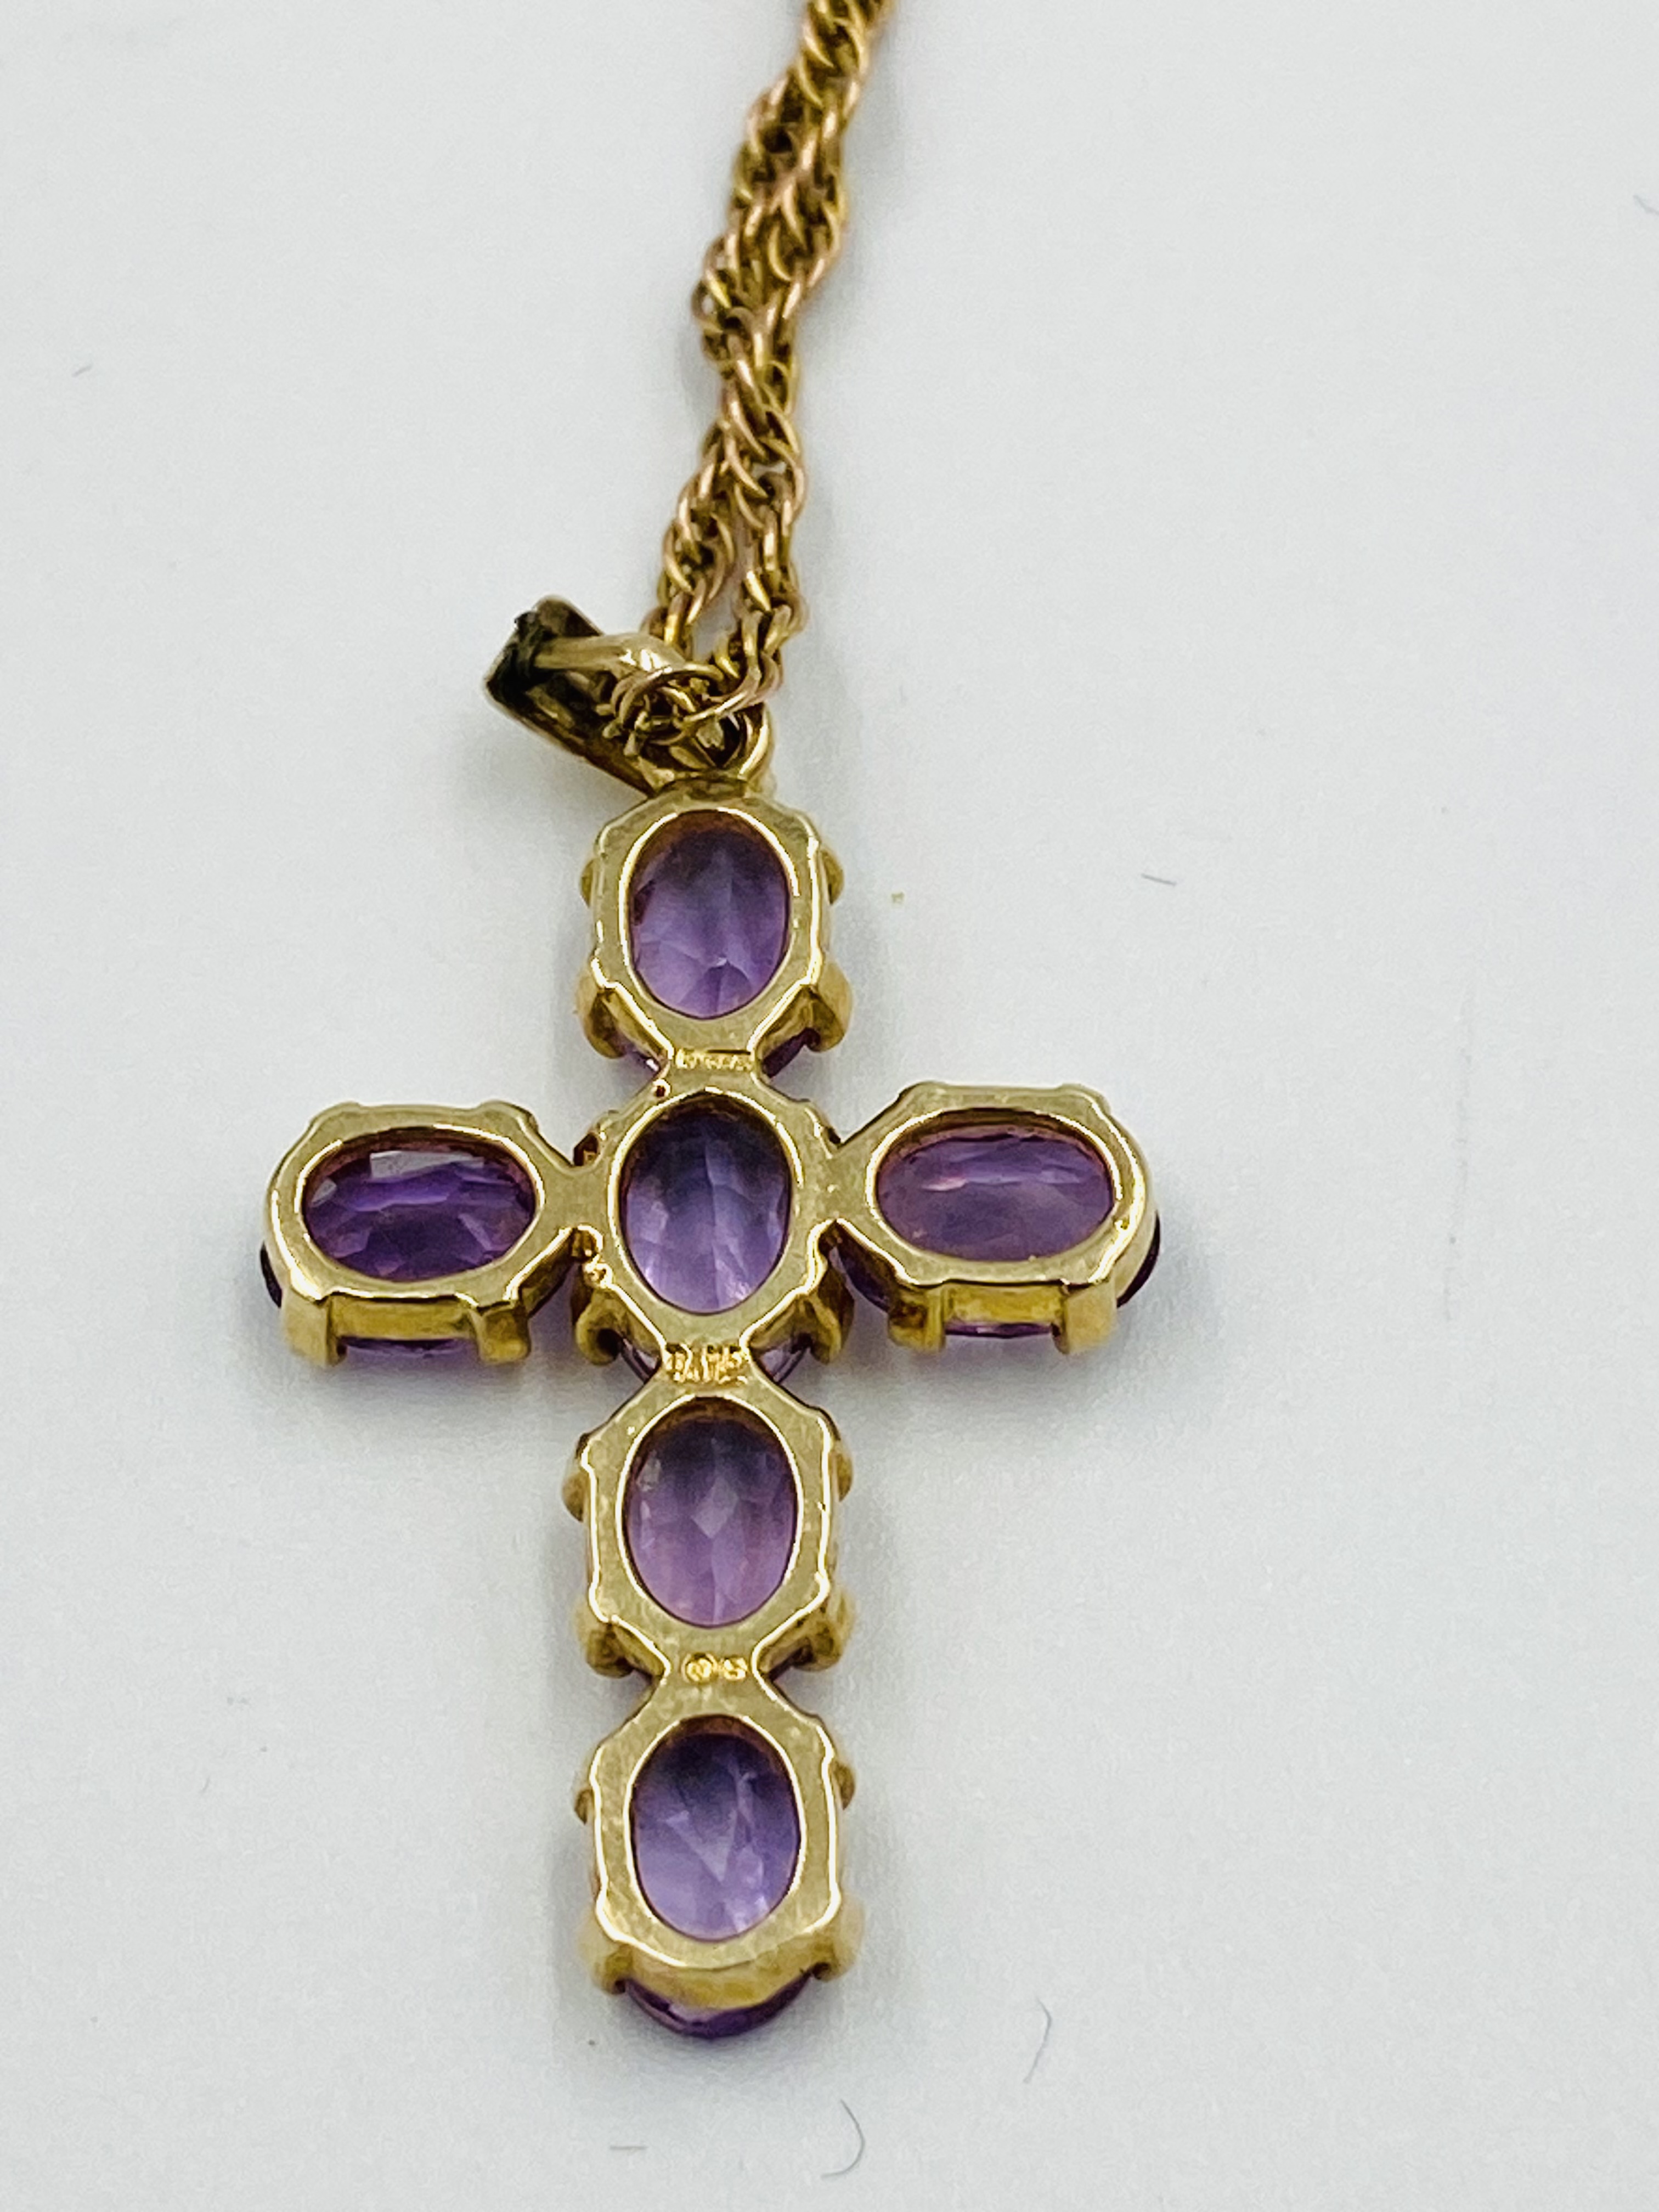 9ct gold cross set with amethysts, on a 9ct gold rope chain - Image 4 of 5